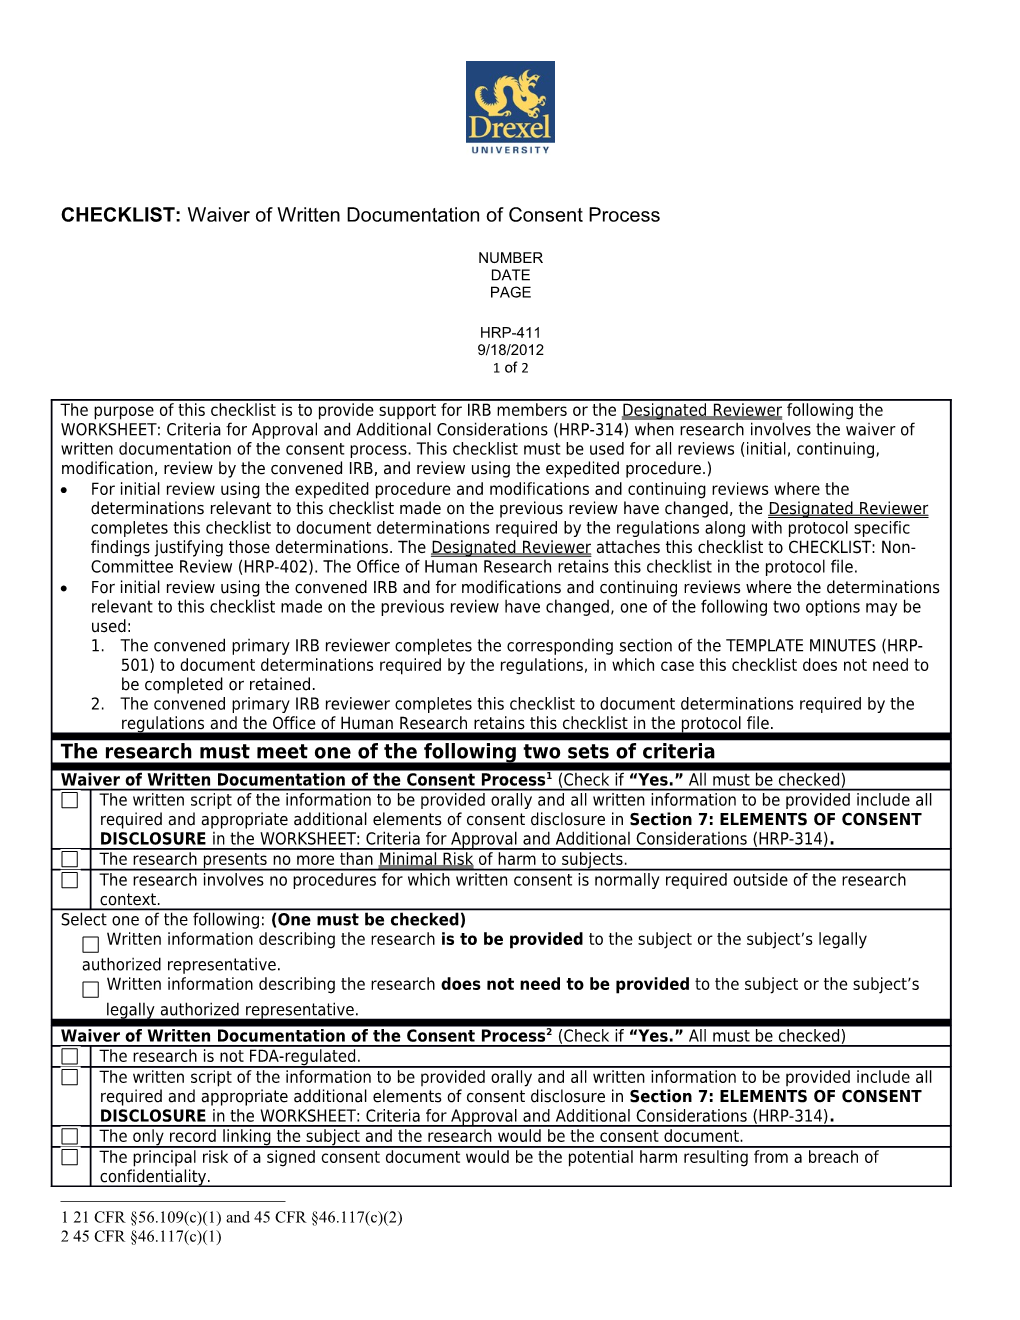 HRP-411 - CHECKLIST - Waiver of Written Documentation of the Consent Process